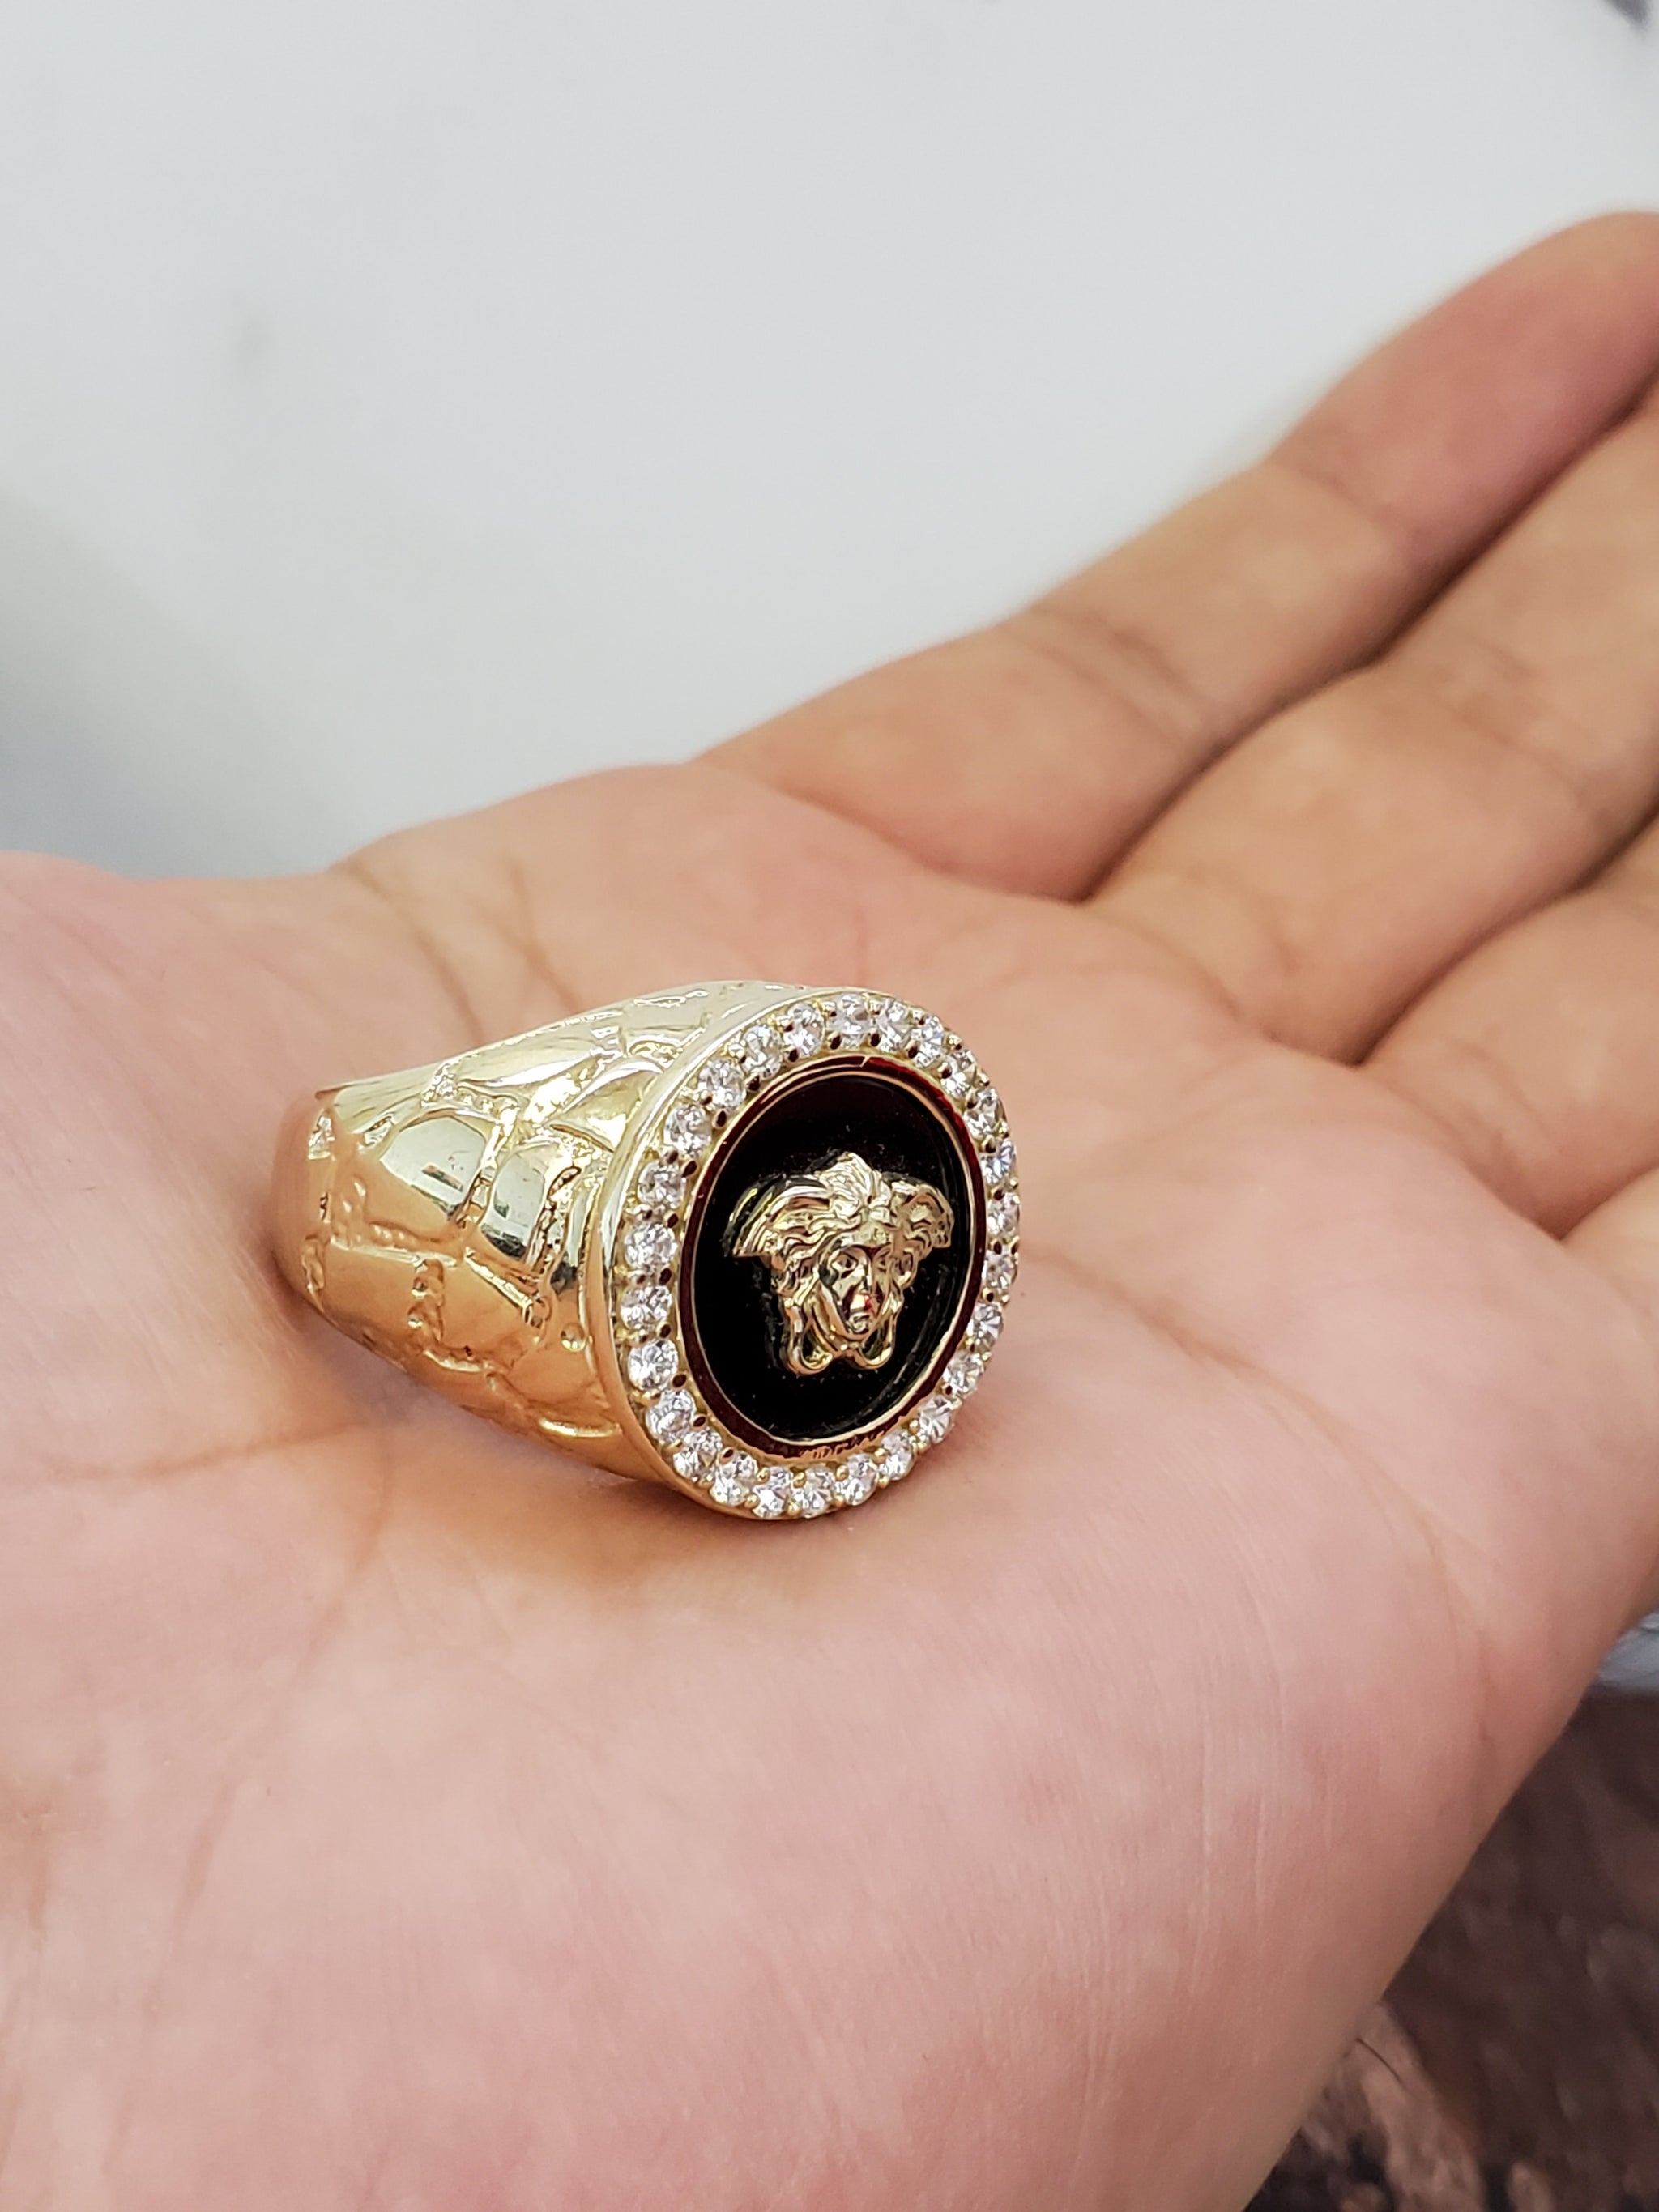 10k Solid Gold Diamond Ring, Versace Style Medusa Head Size 11 12.7 Grams  of Gold - Etsy